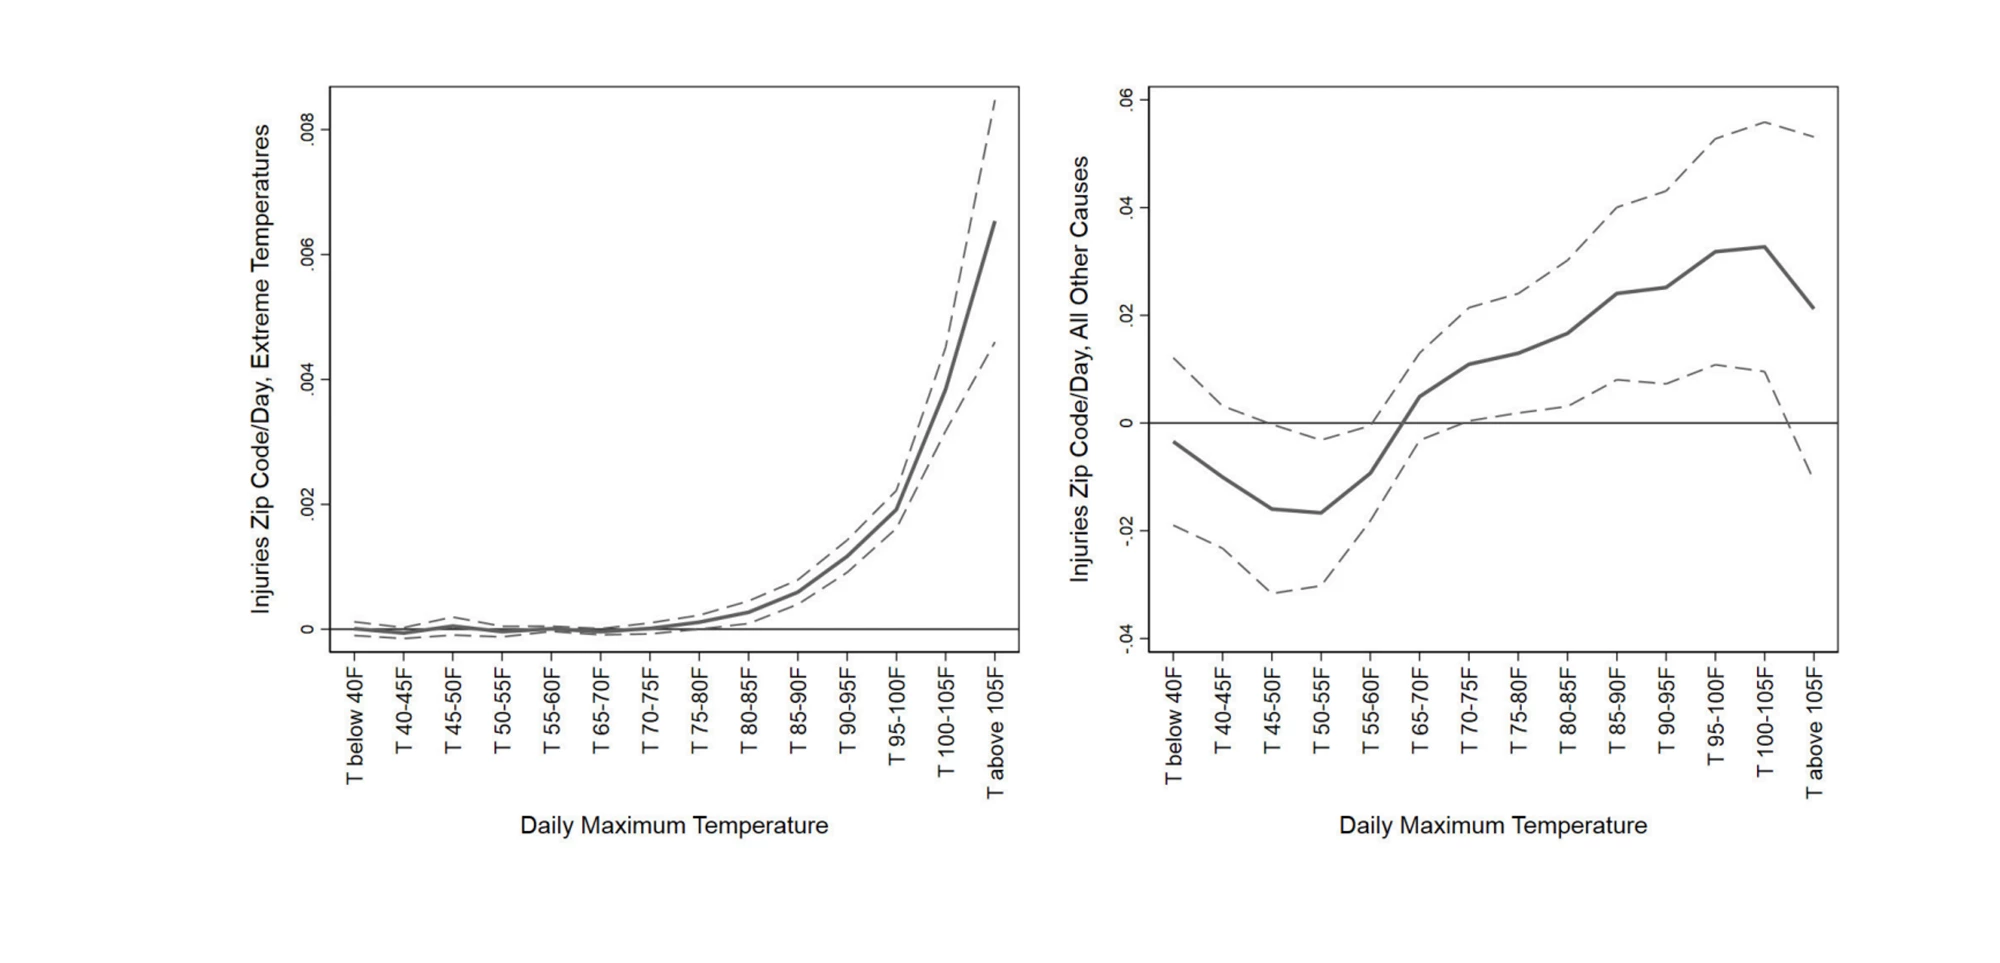 Impact of hot days on workplace injuries (from Park, Pankratz, and Behrer (2021)